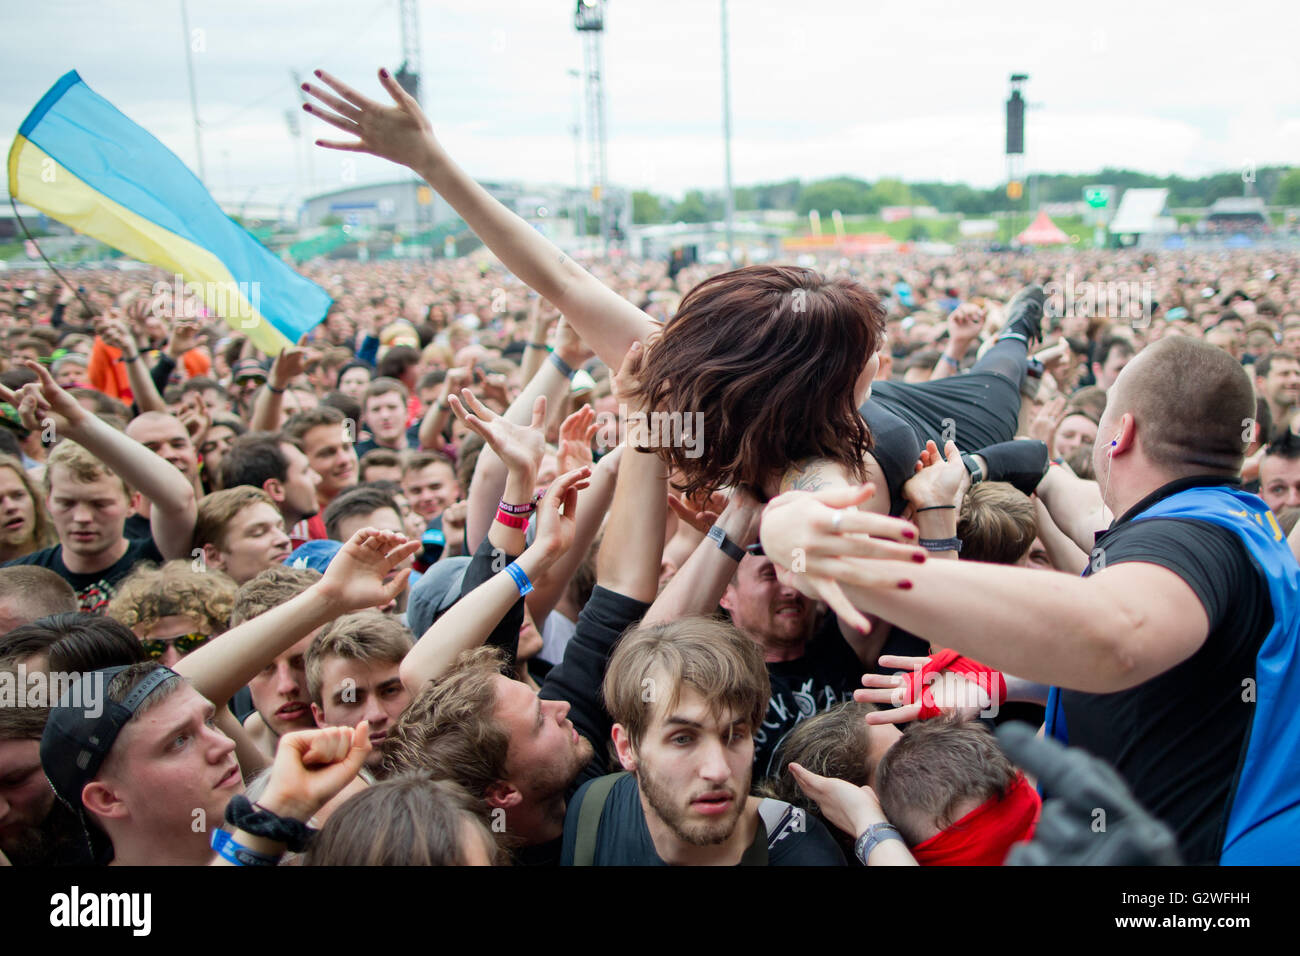 Nuremberg, Germany. 03rd June, 2016. A woman crowdsurfs during a concert at the music festival 'Rock im Park' (Rock in the Park) in Nuremberg, Germany, 03 June 2016. More than 80 bands are set to perform at the festival until 05 June. Photo: DANIEL KARMANN/dpa/Alamy Live News Stock Photo